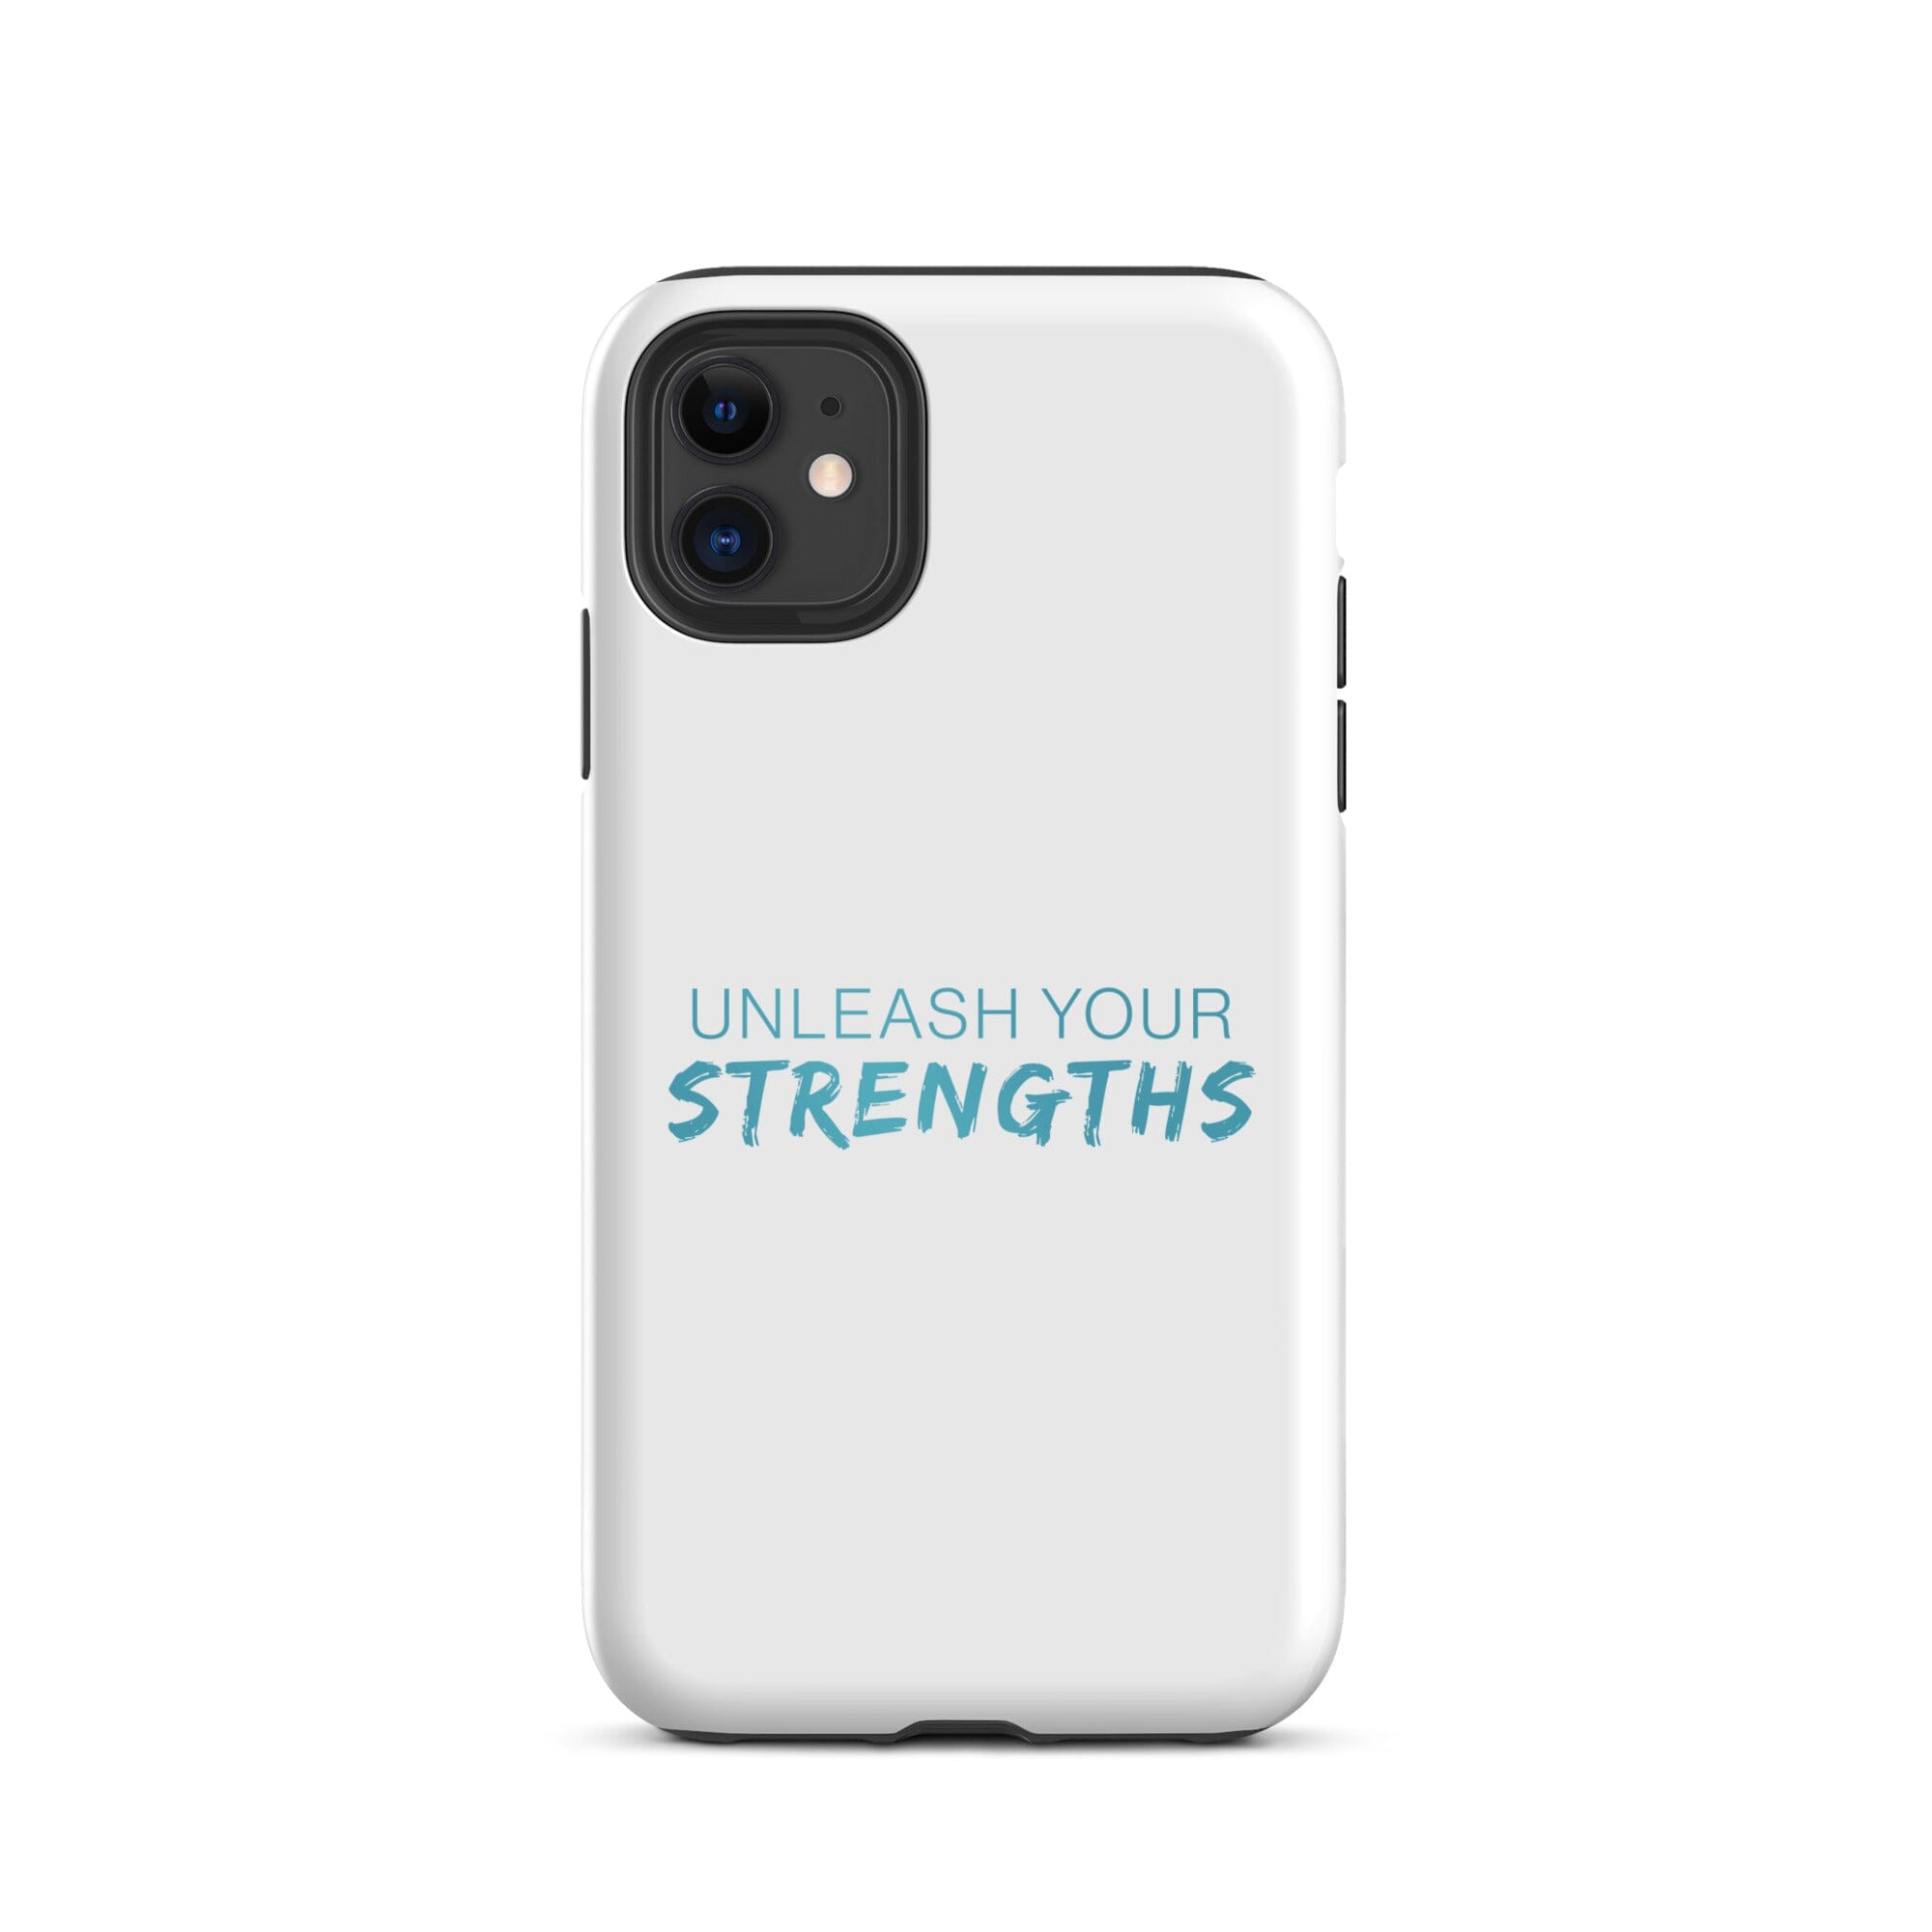 Unleash Your Strengths - Phone case